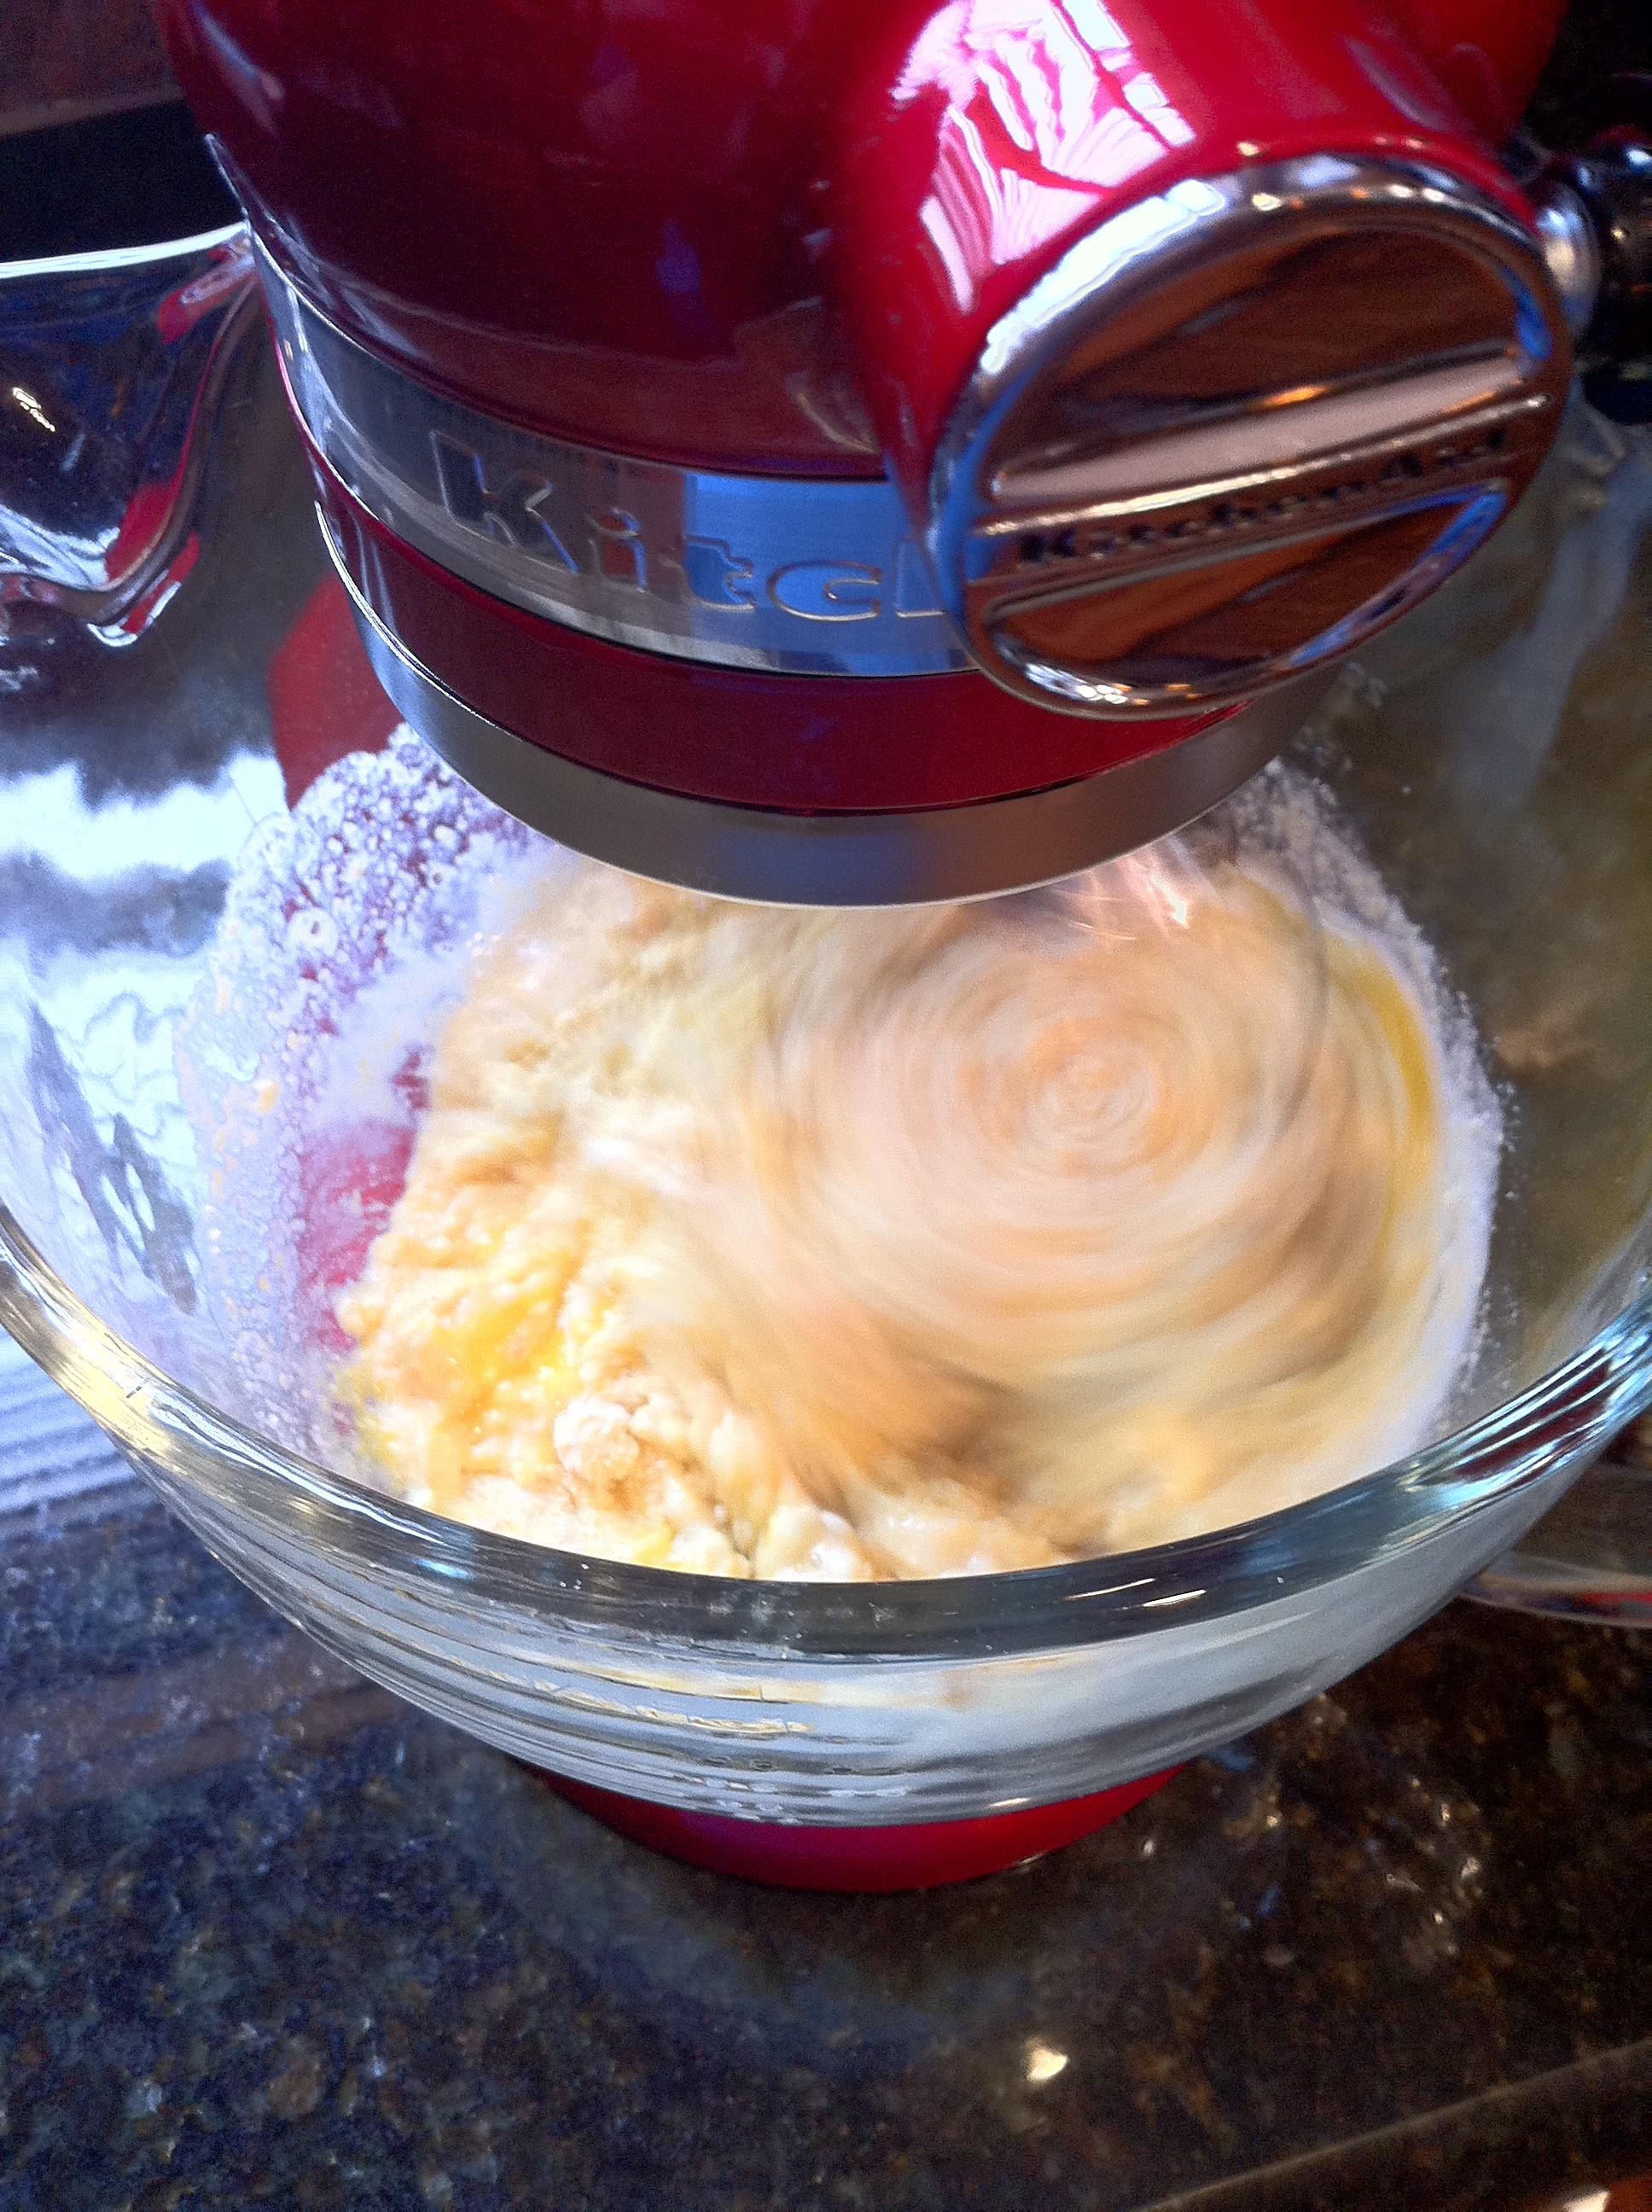 The Kitchen Aid Mixing the Corn Muffin Batter